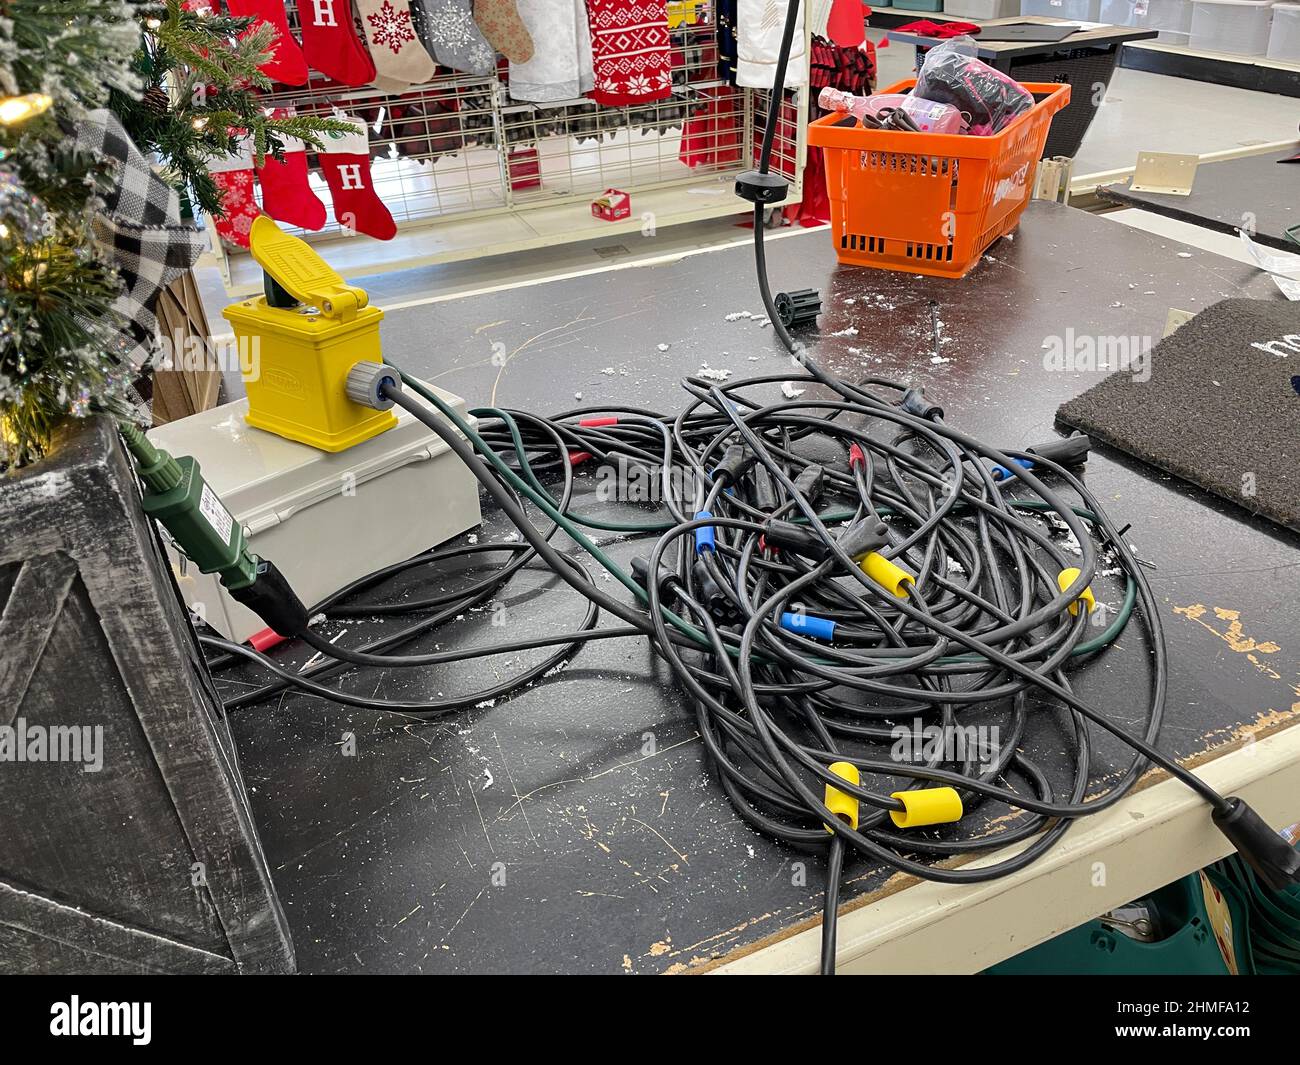 Augusta, Ga USA - 12 09 21: Big Lots retail store interior Hwy 25 electrical wiring on a table Stock Photo